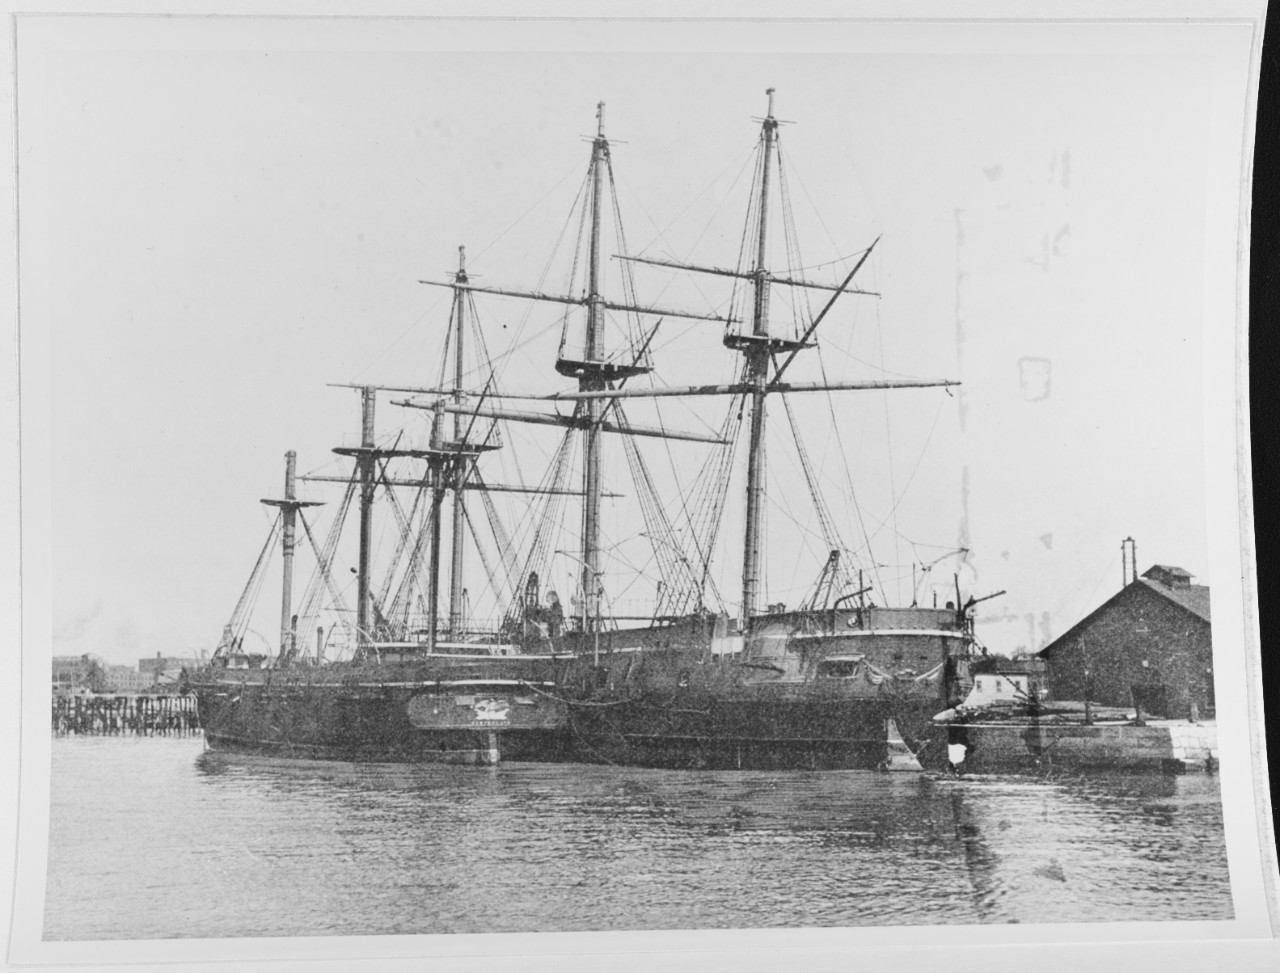 USS PORTSMOUTH (1843-1915) and USS LANCASTER (1859-1919)